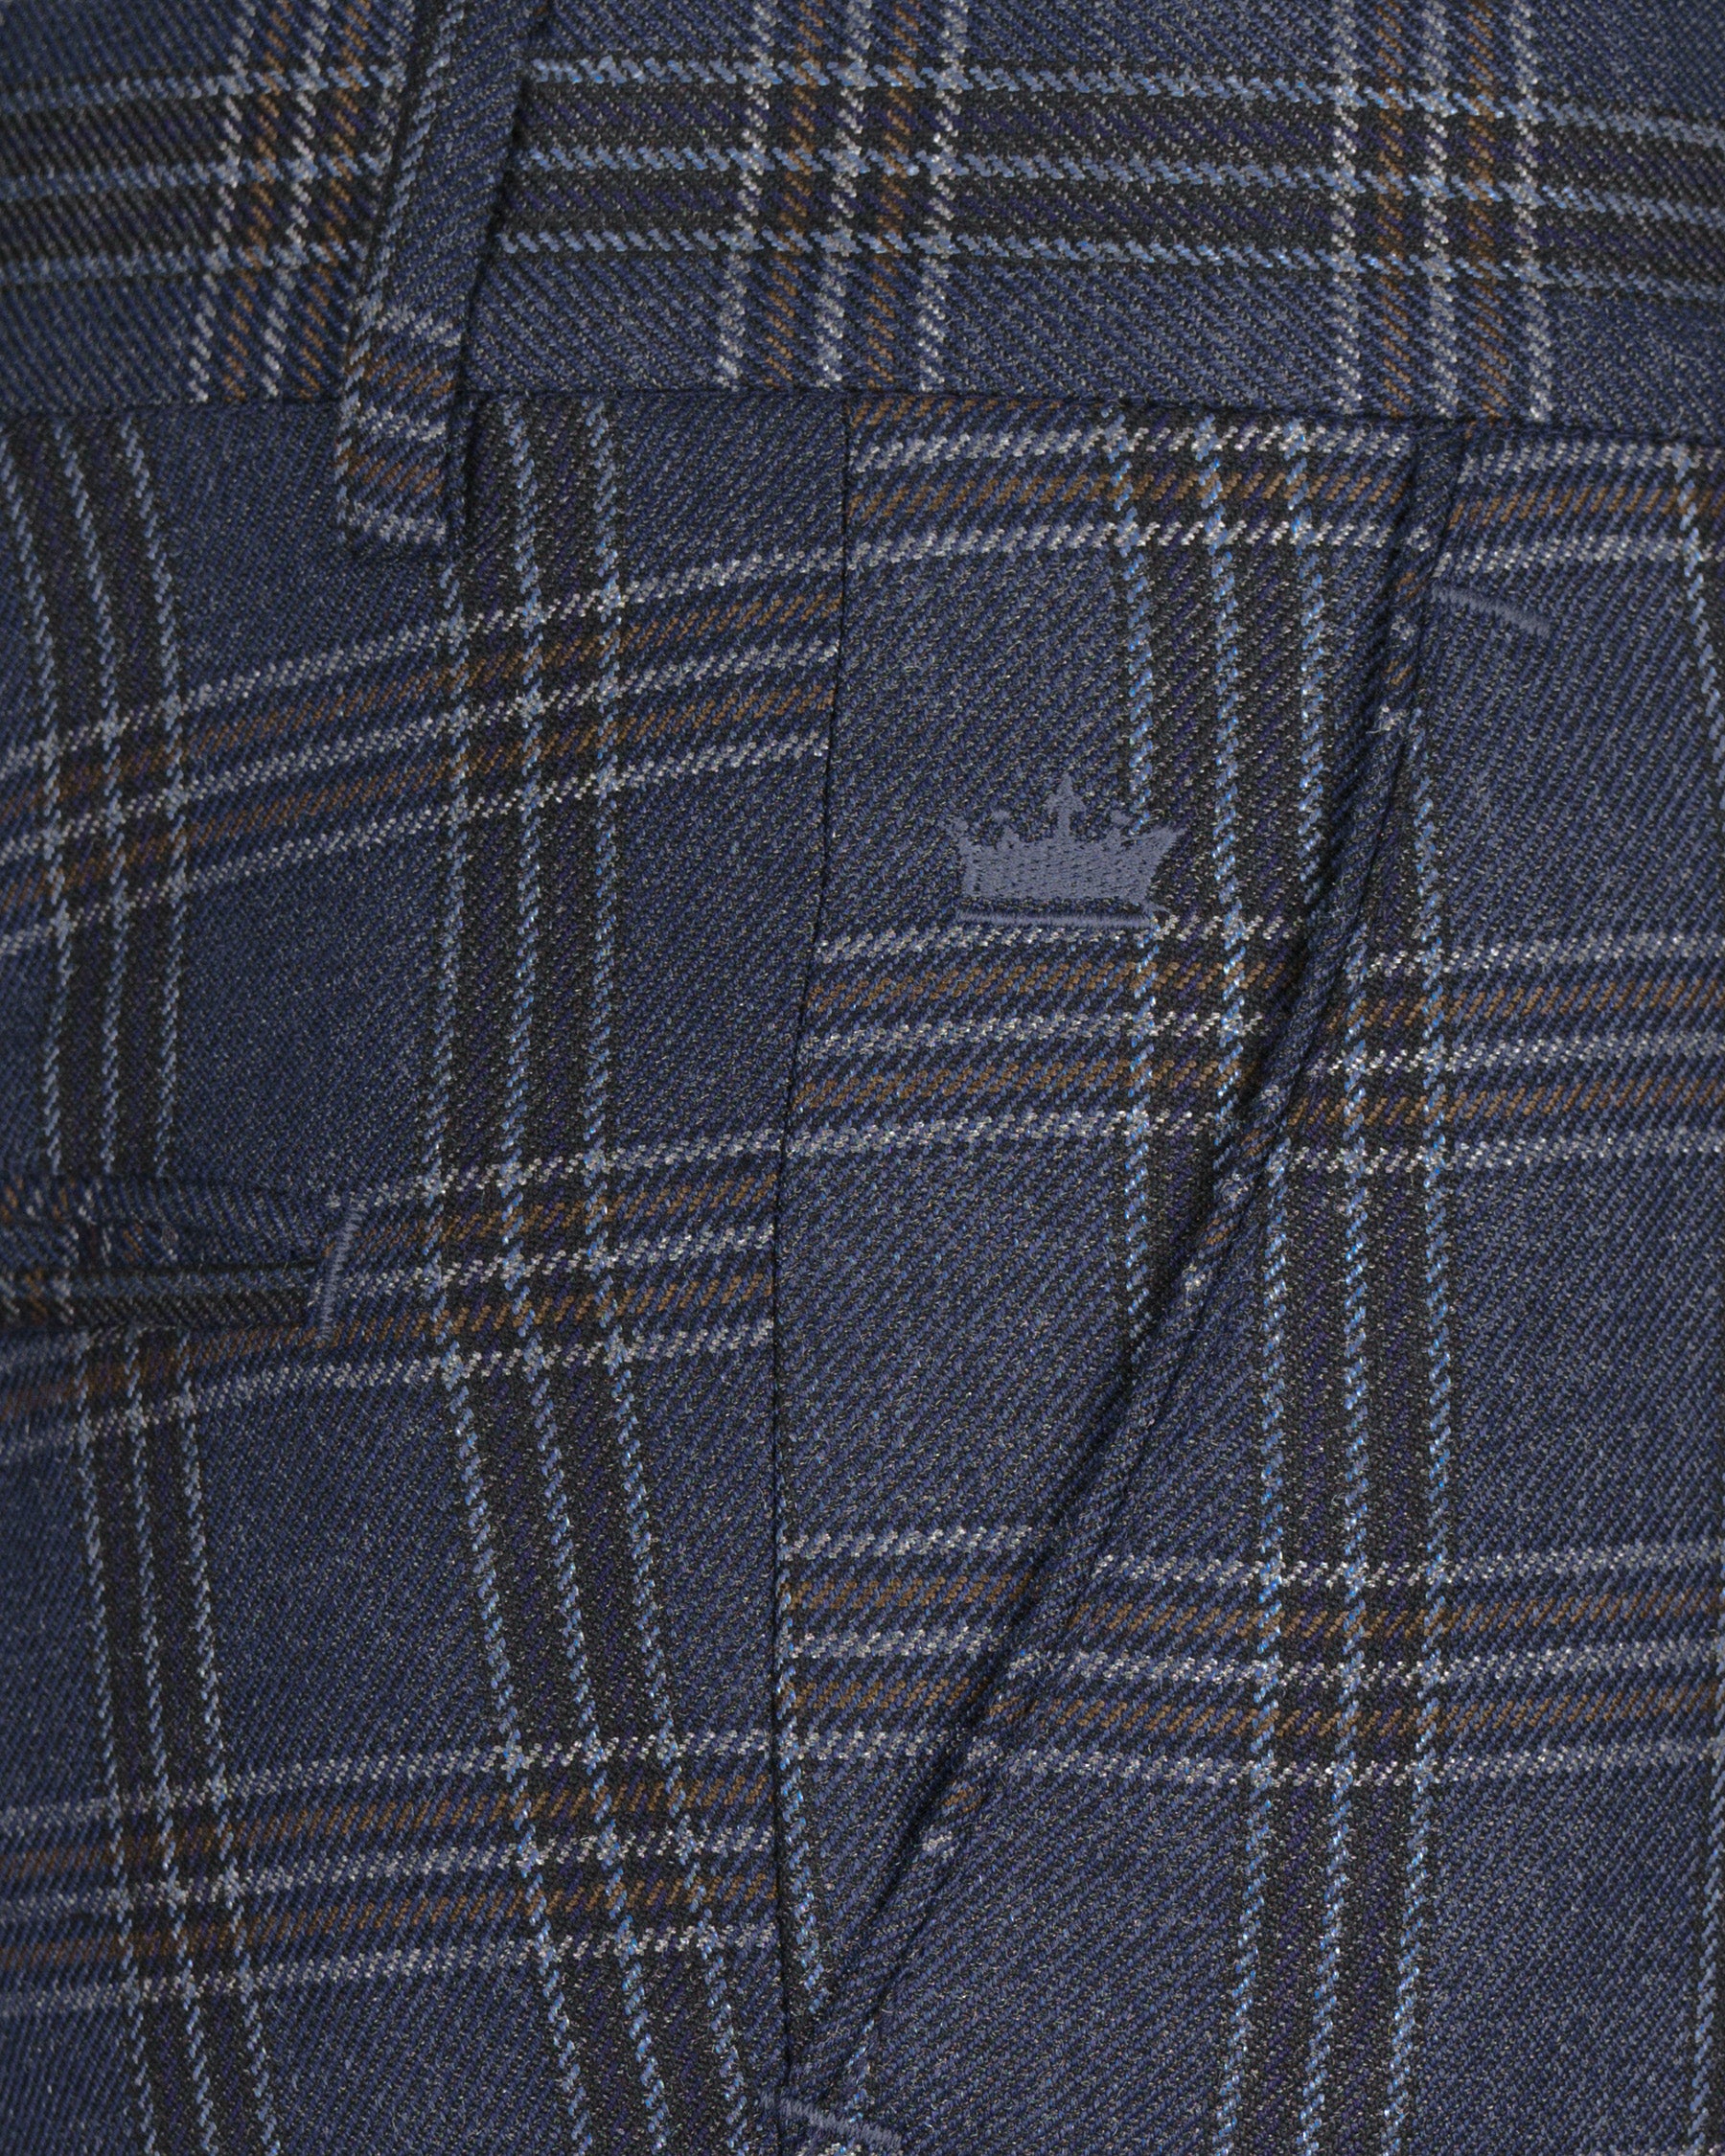 Licorice Blue Plaid heavyweight tweed Wool Rich Double Breasted Suit